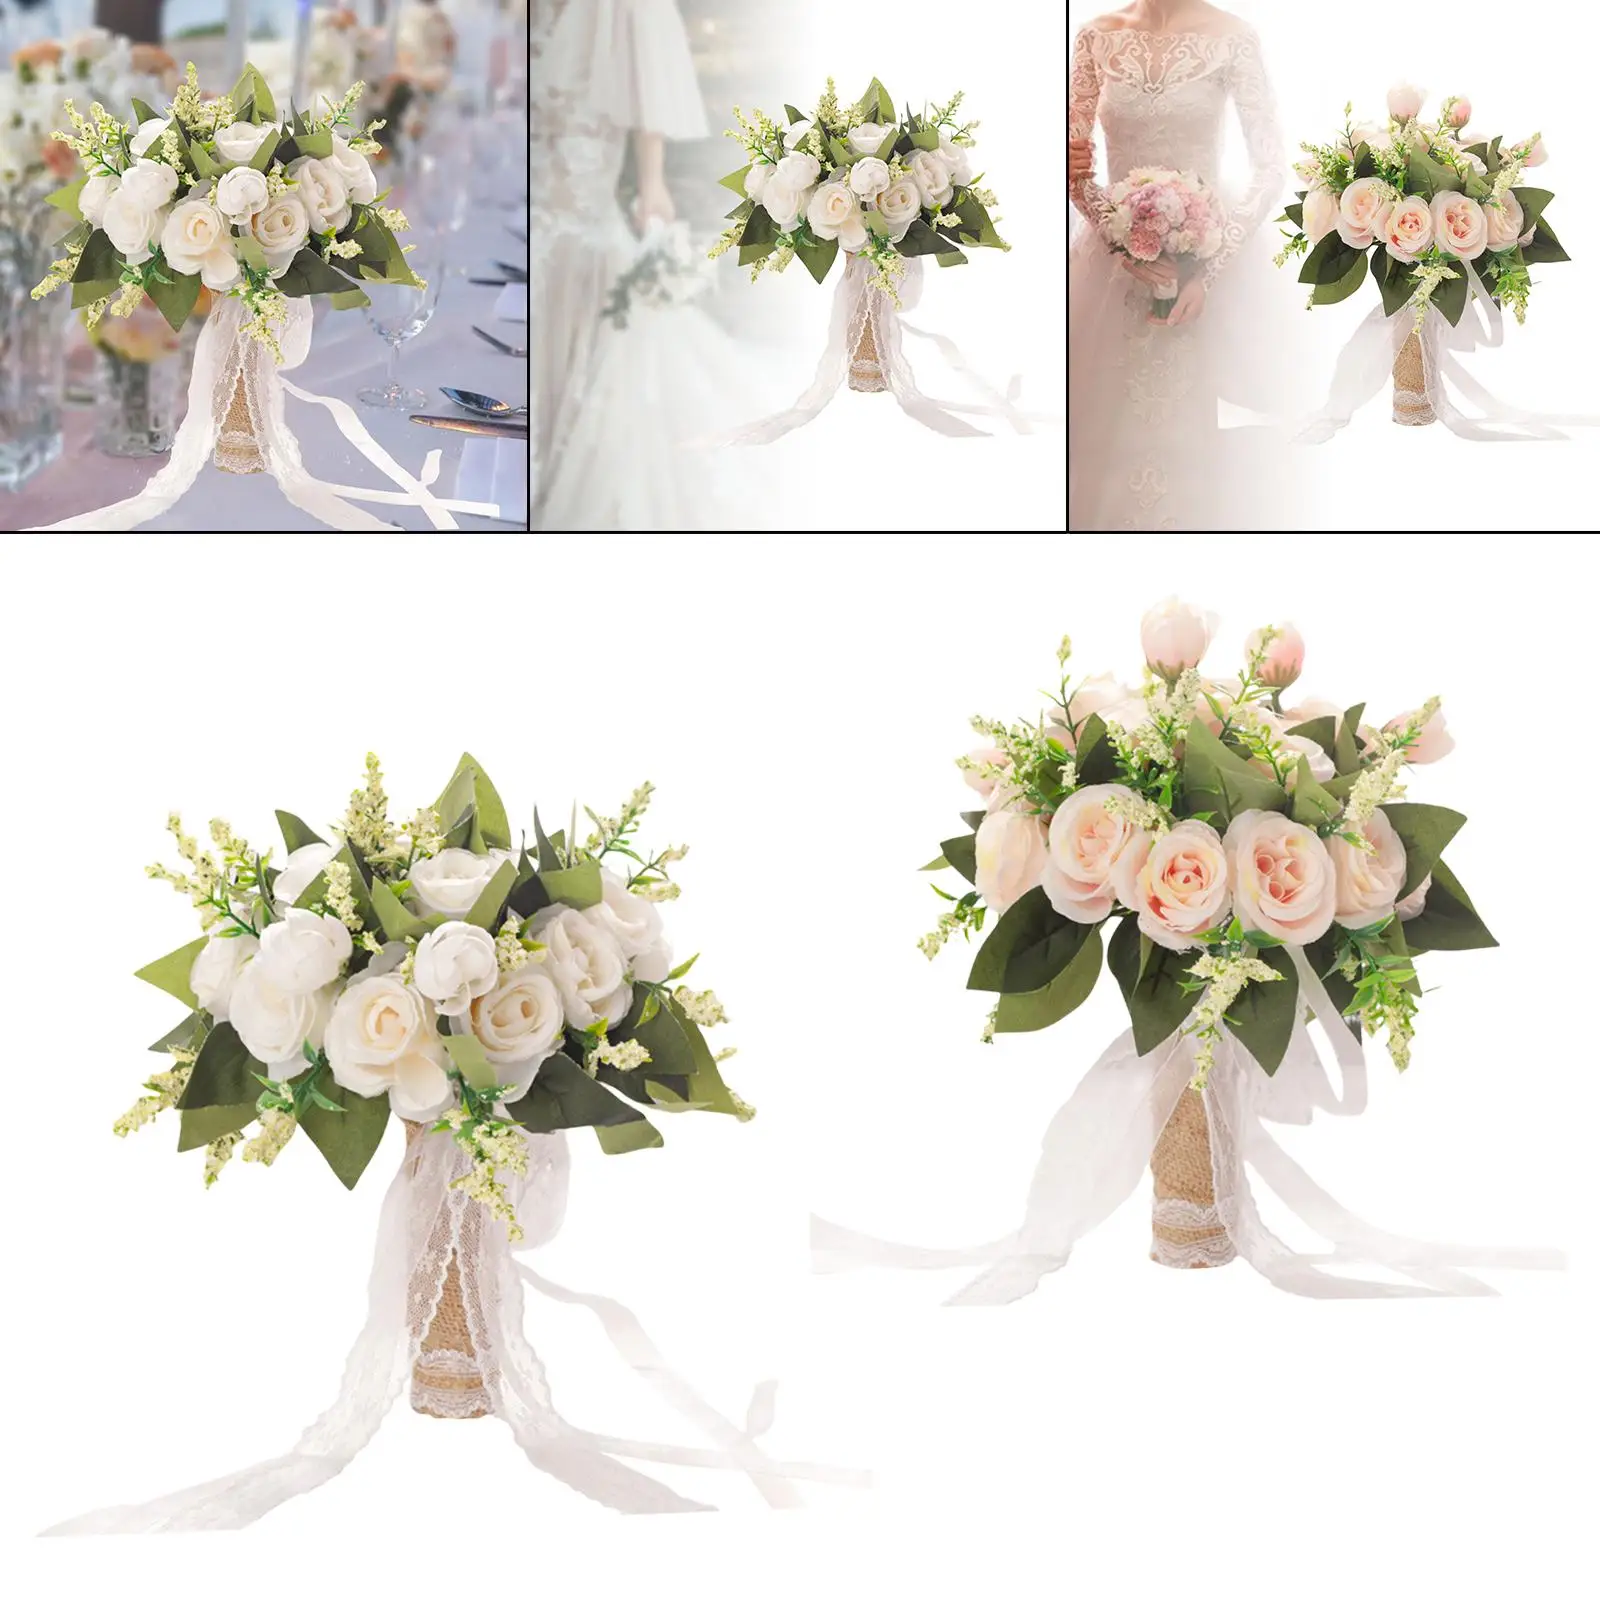 Wedding Bouquets Bride Holding Flowers for Ceremony Anniversary Supplies